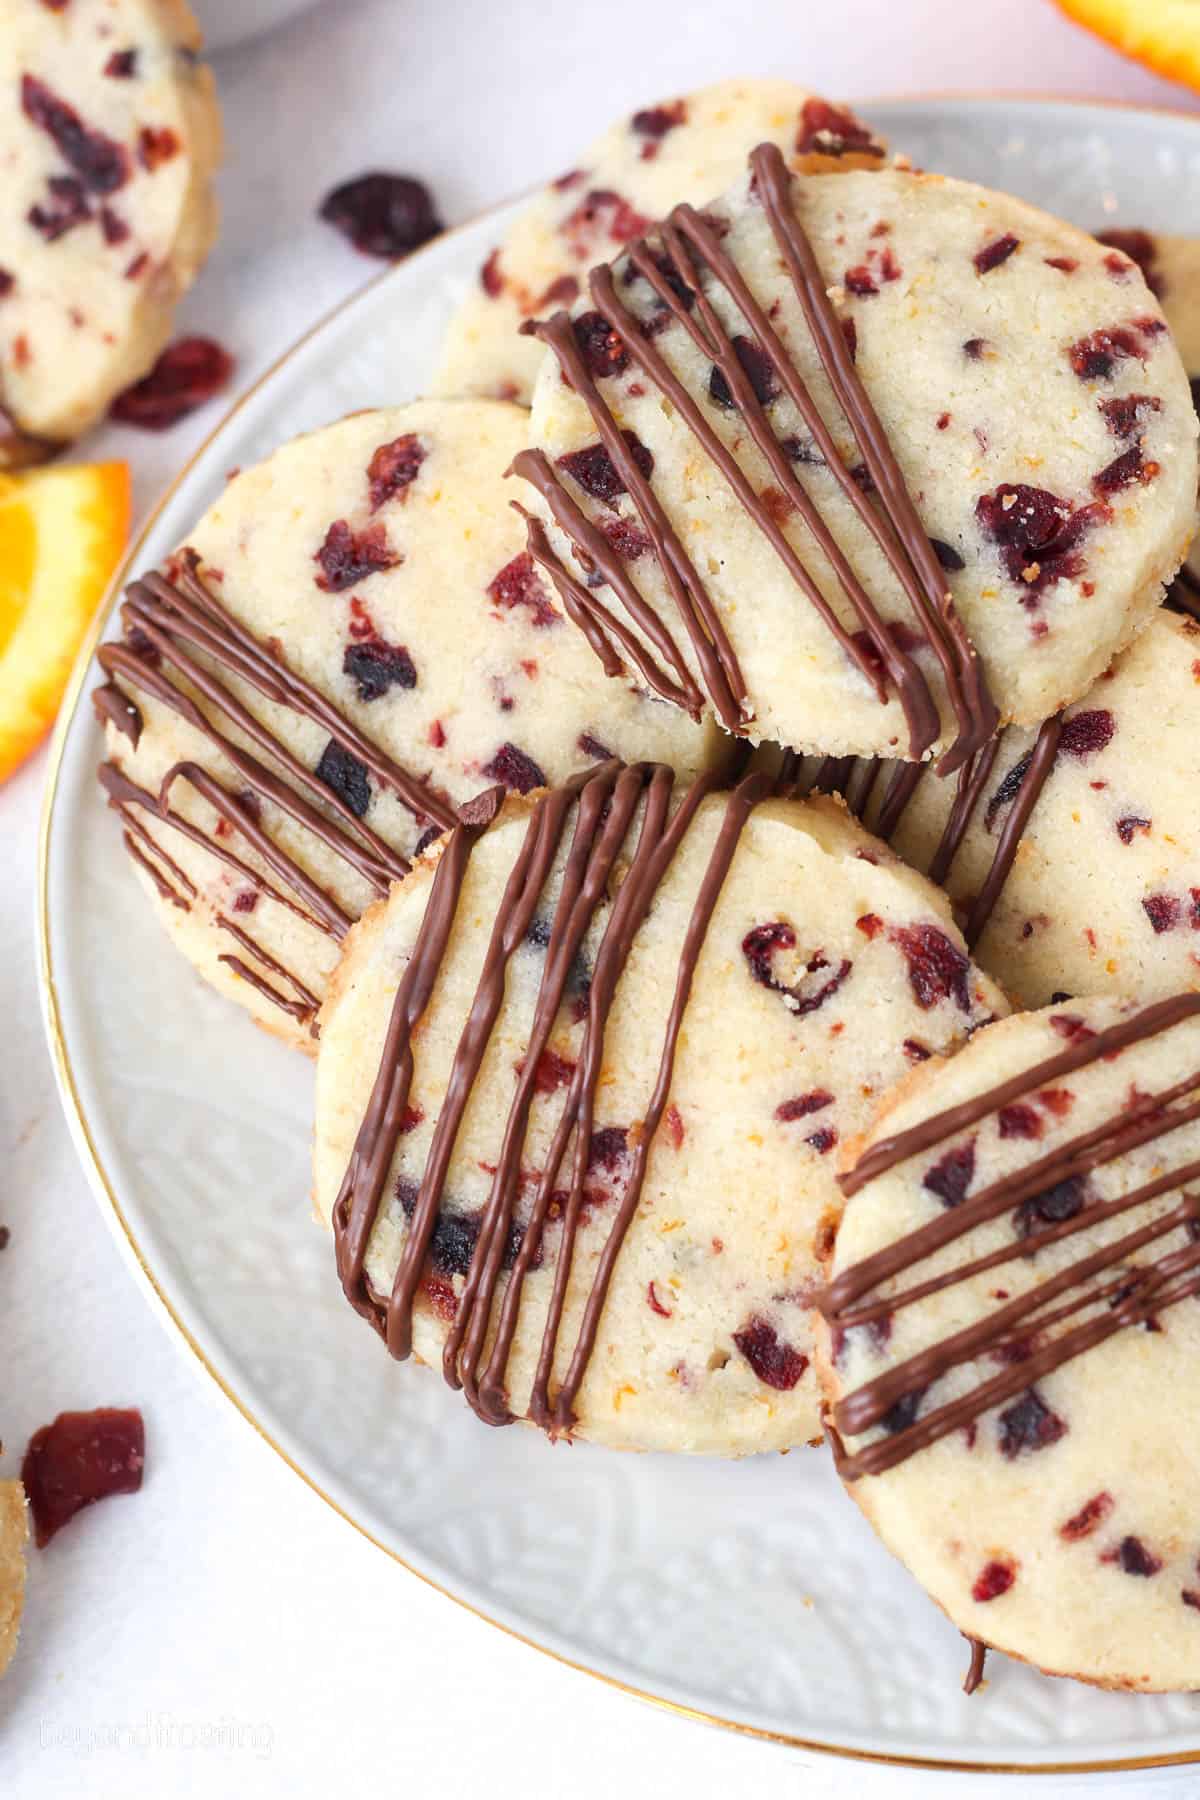 Cranberry orange shortbread cookies drizzled with melted chocolate, stacked on a white plate.